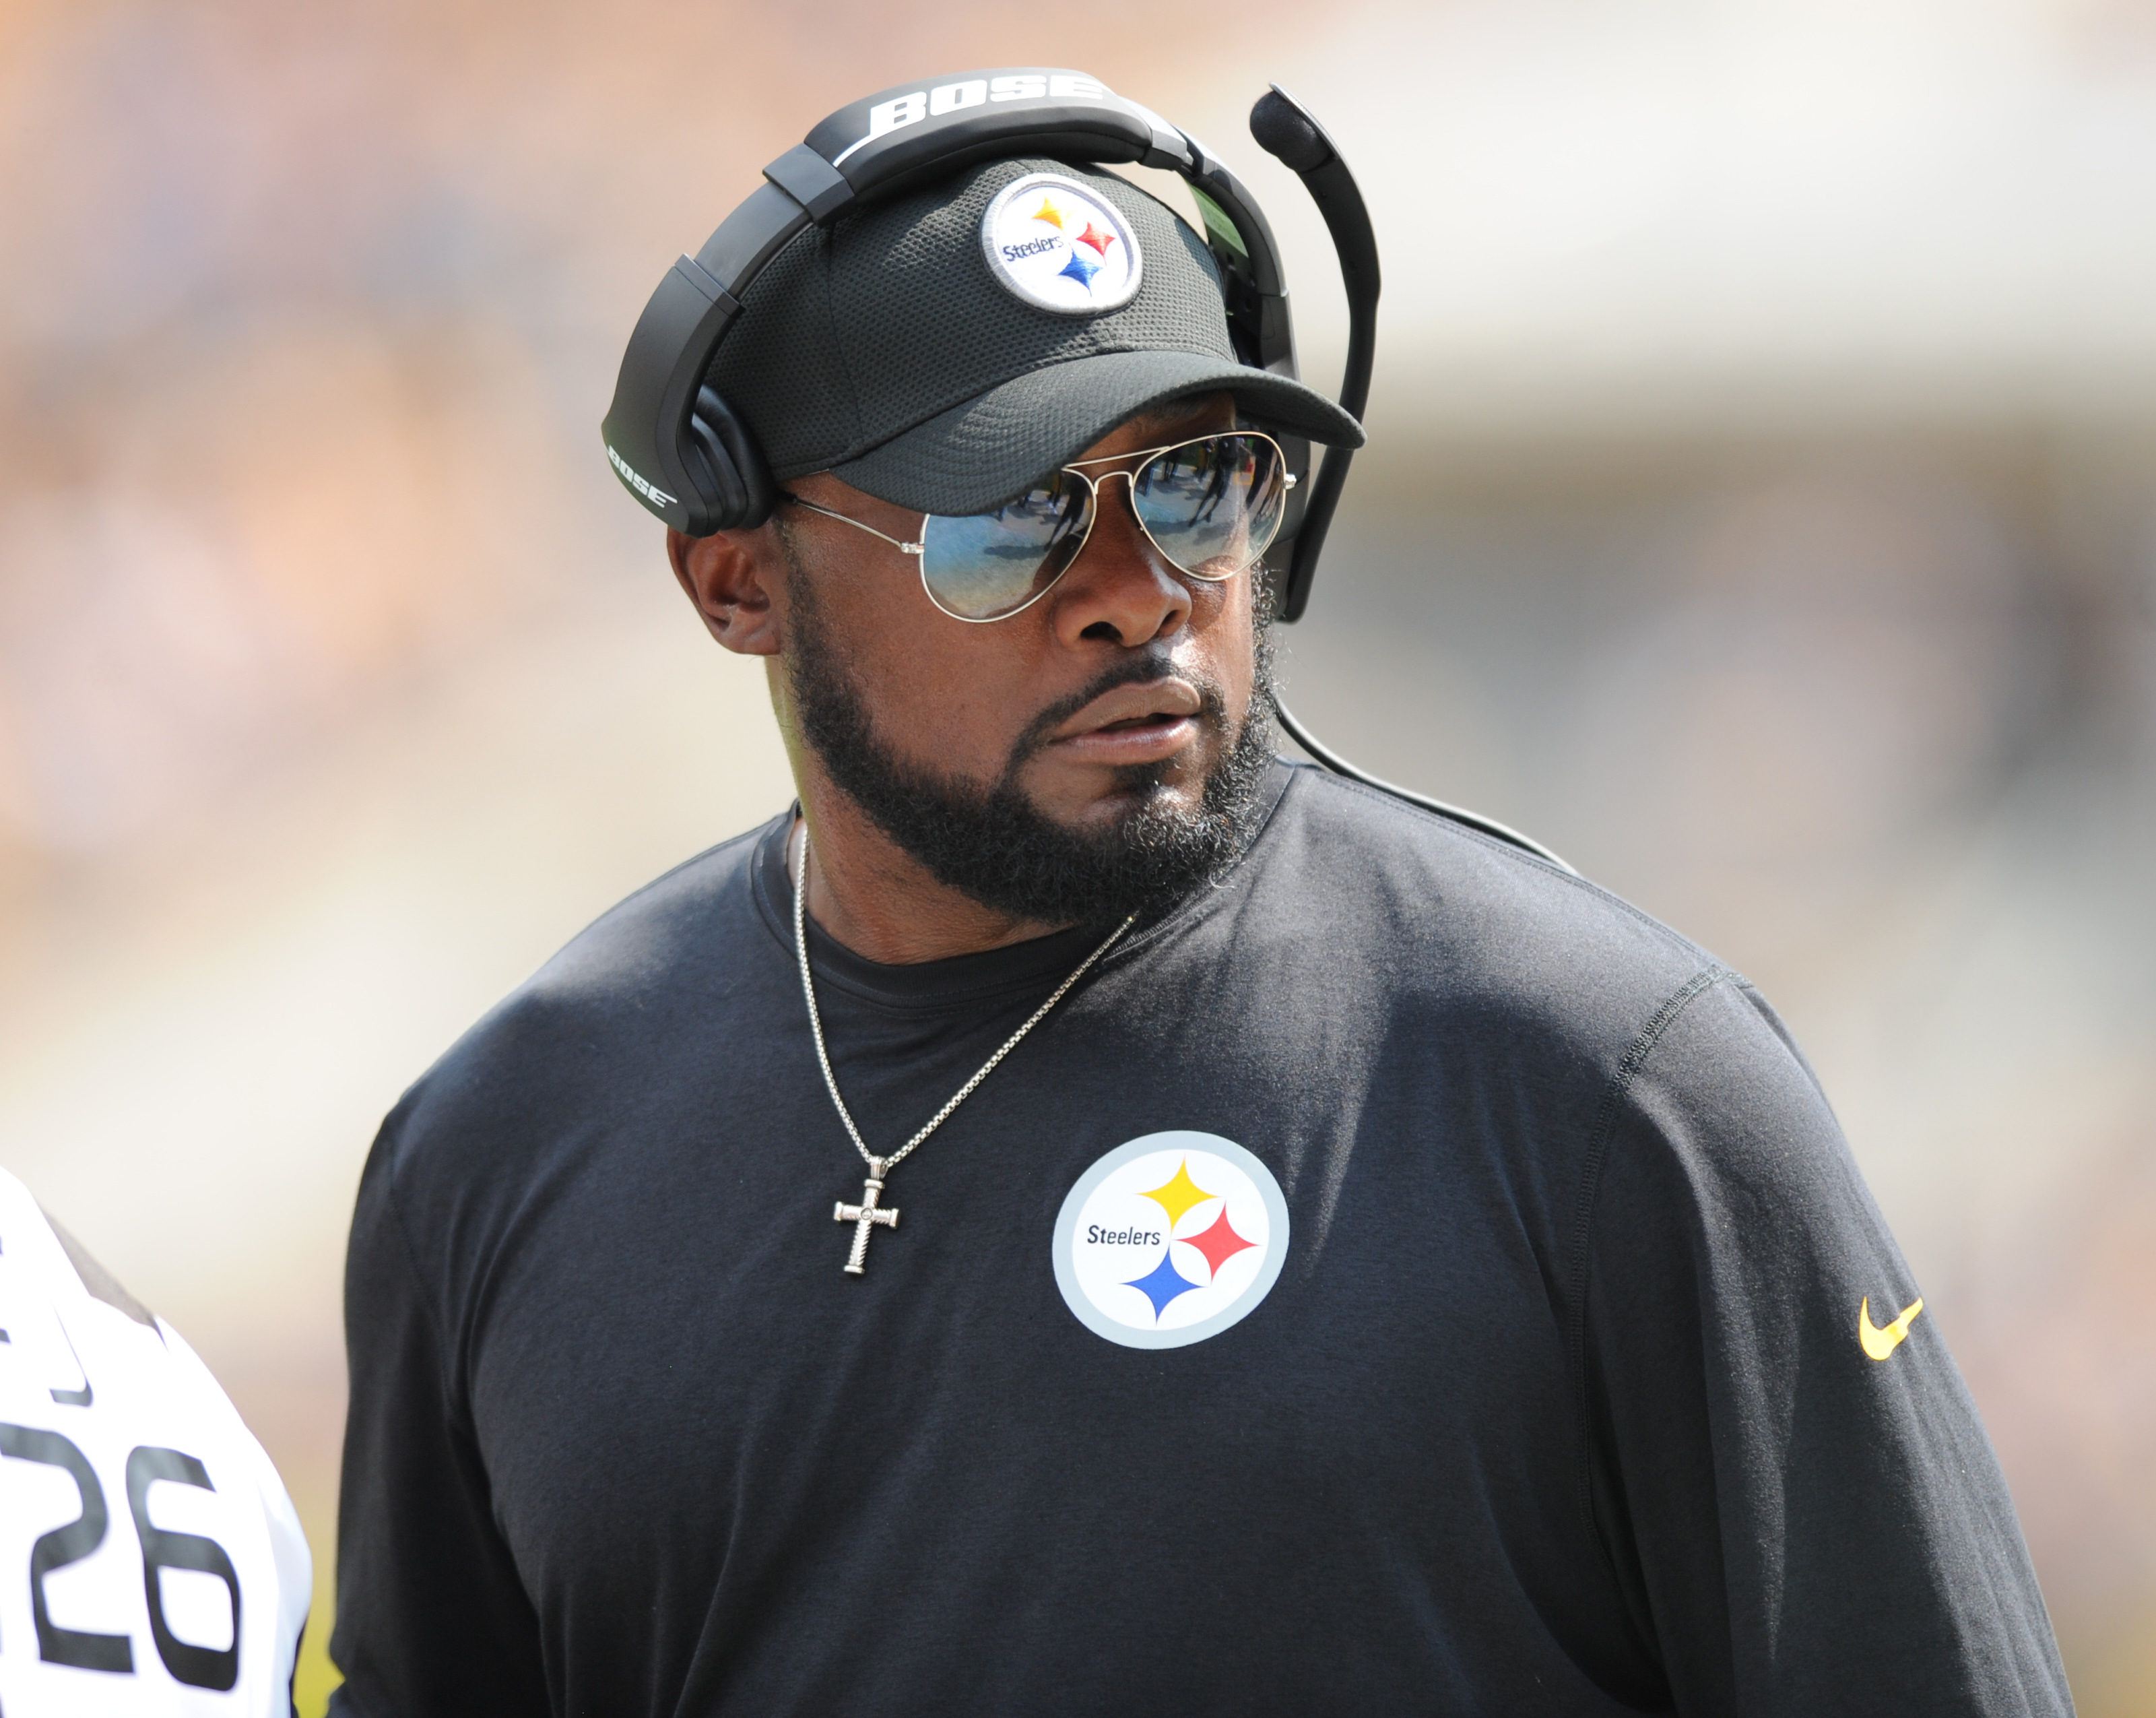 Steelers Will “Exercise Appropriate Patience